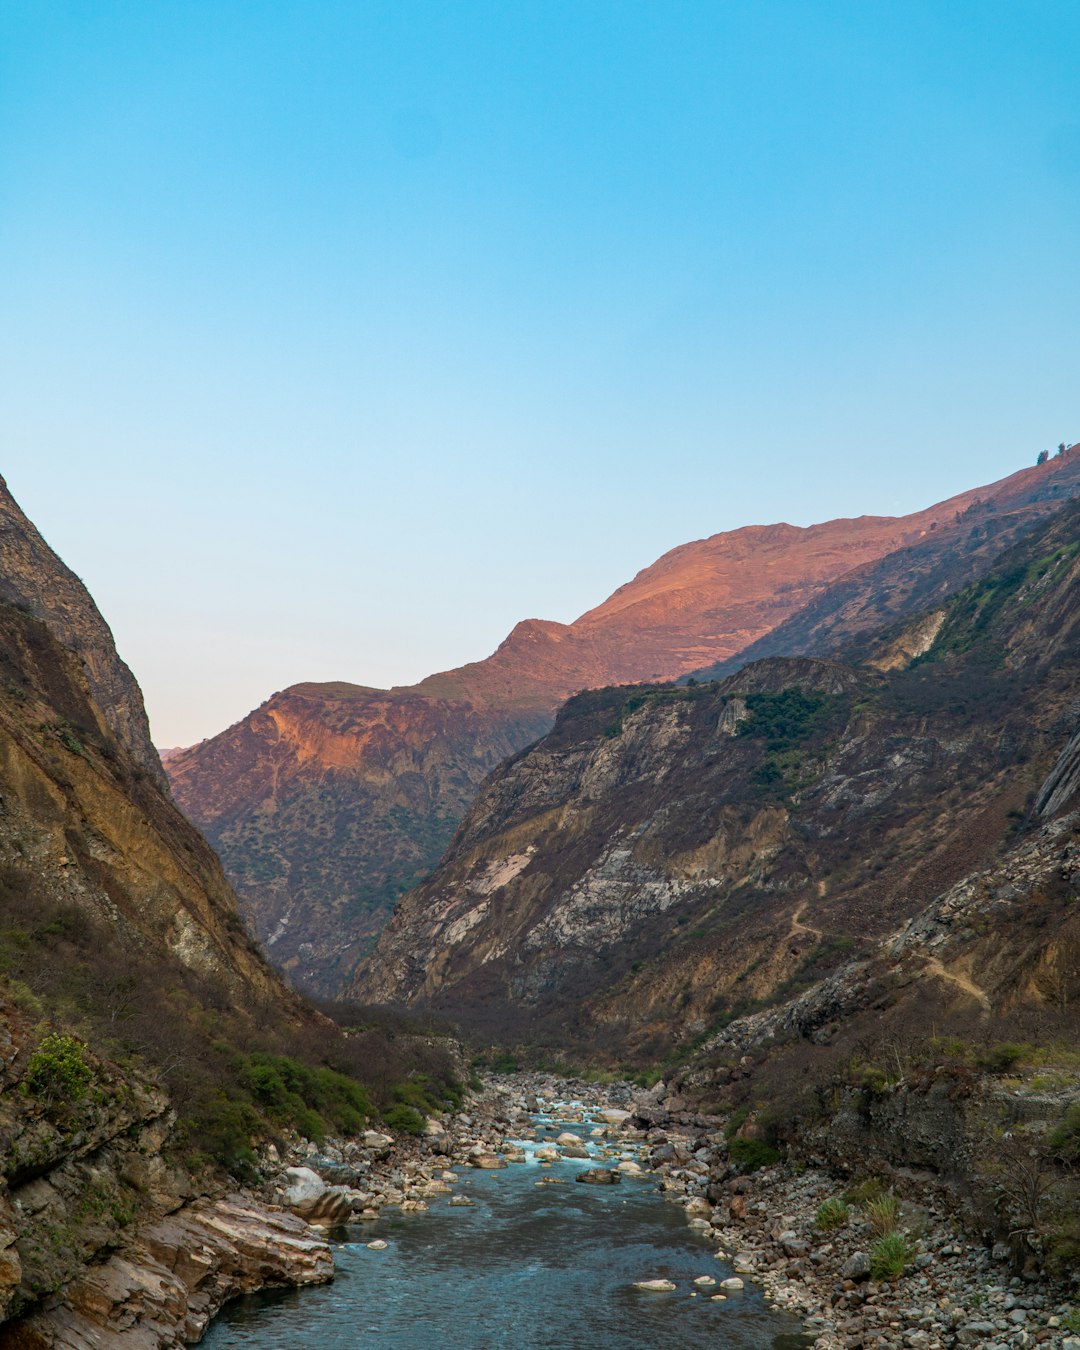 Travel Tips and Stories of Apurimac River in Peru